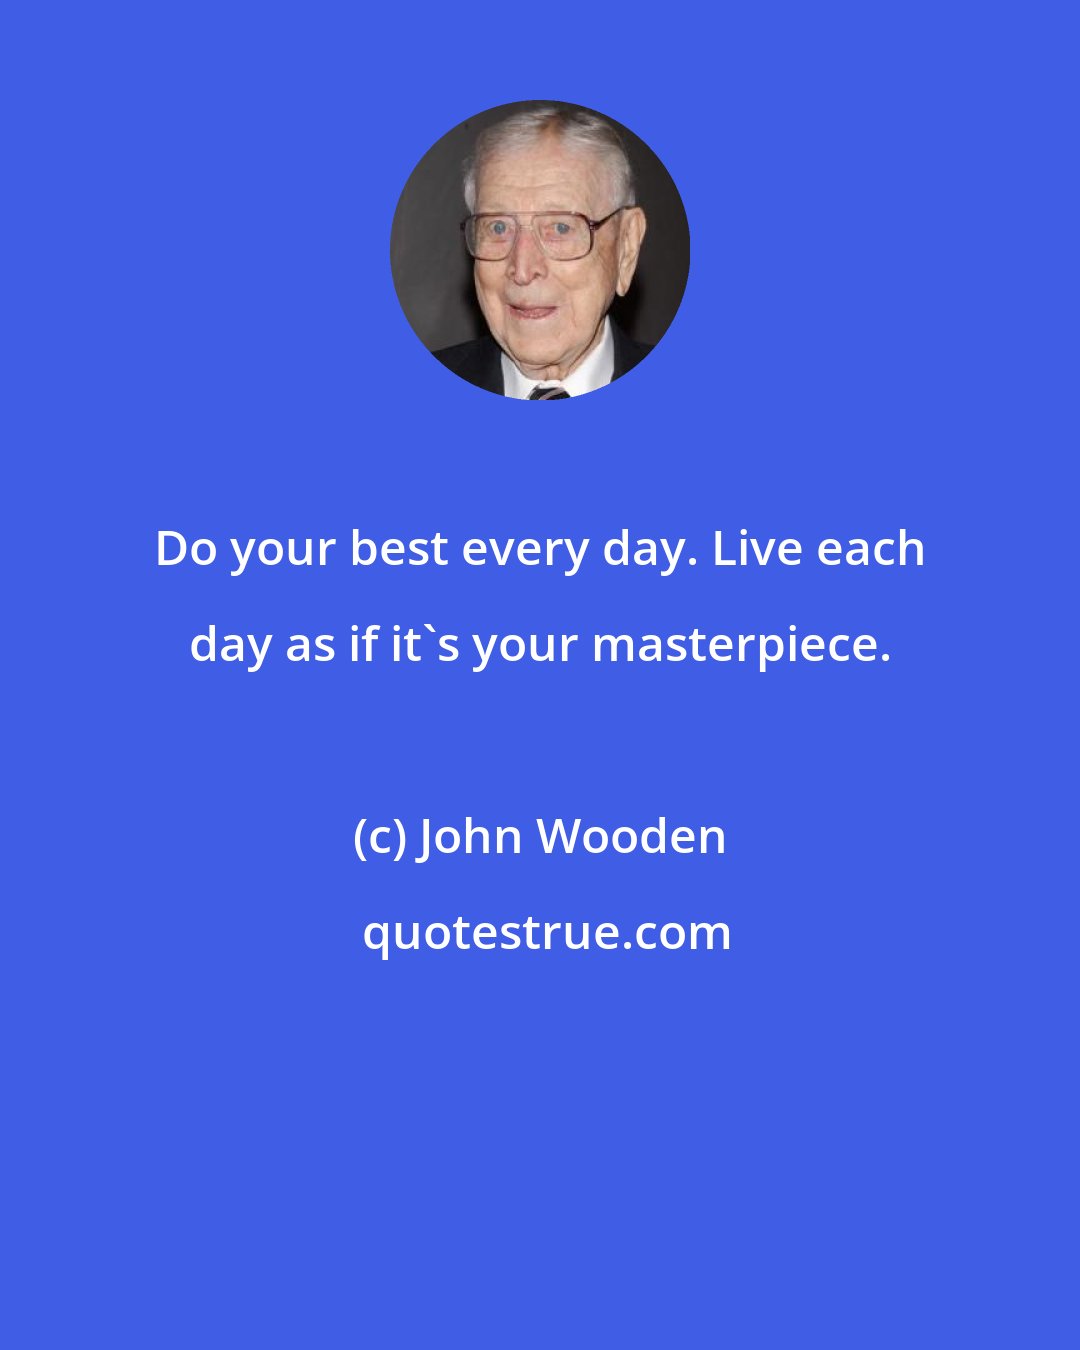 John Wooden: Do your best every day. Live each day as if it's your masterpiece.